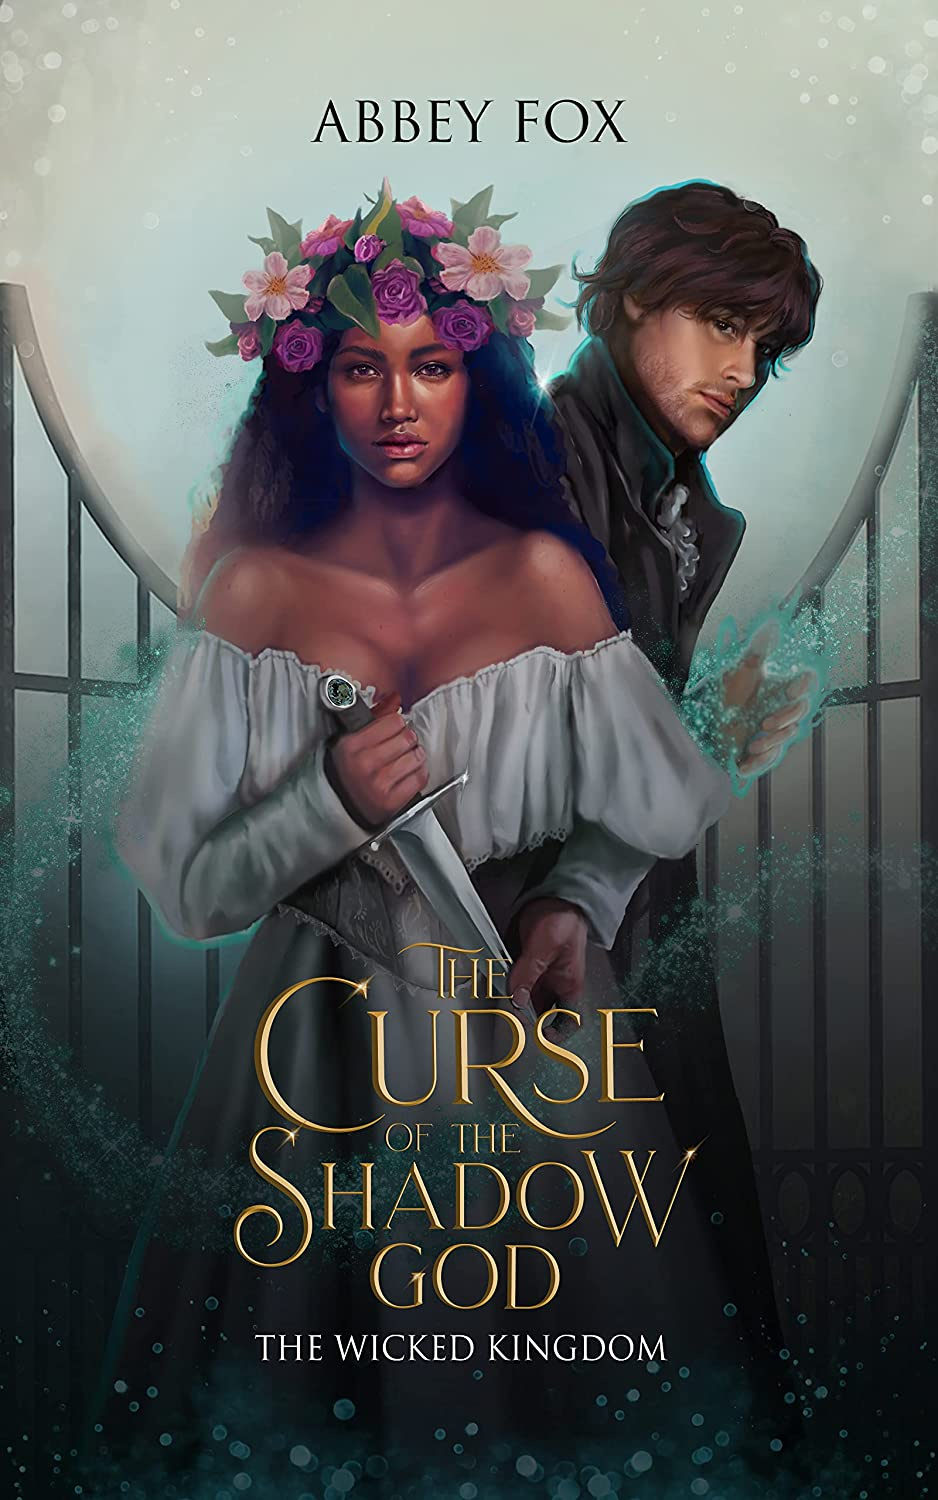 The Curse of the Shadow God by Abbey Fox PDF Download